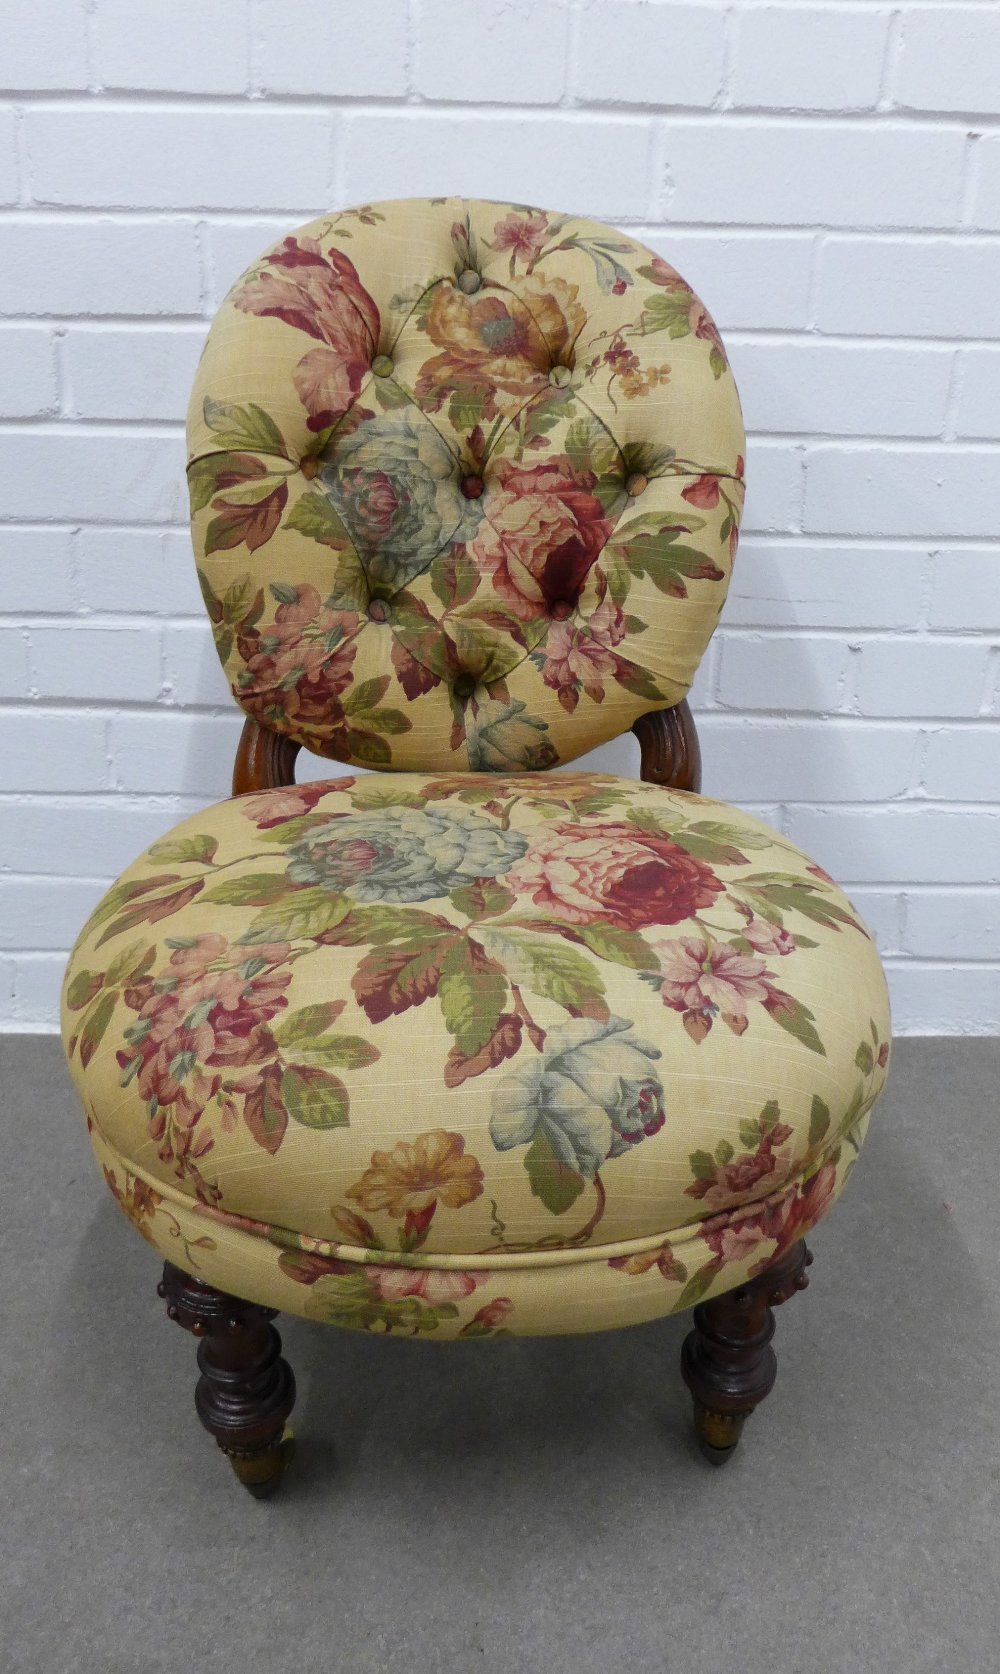 Early 20th century nursing chair with contemporary floral pattern upholstery, 71 x 45 x 37cm. - Image 3 of 3